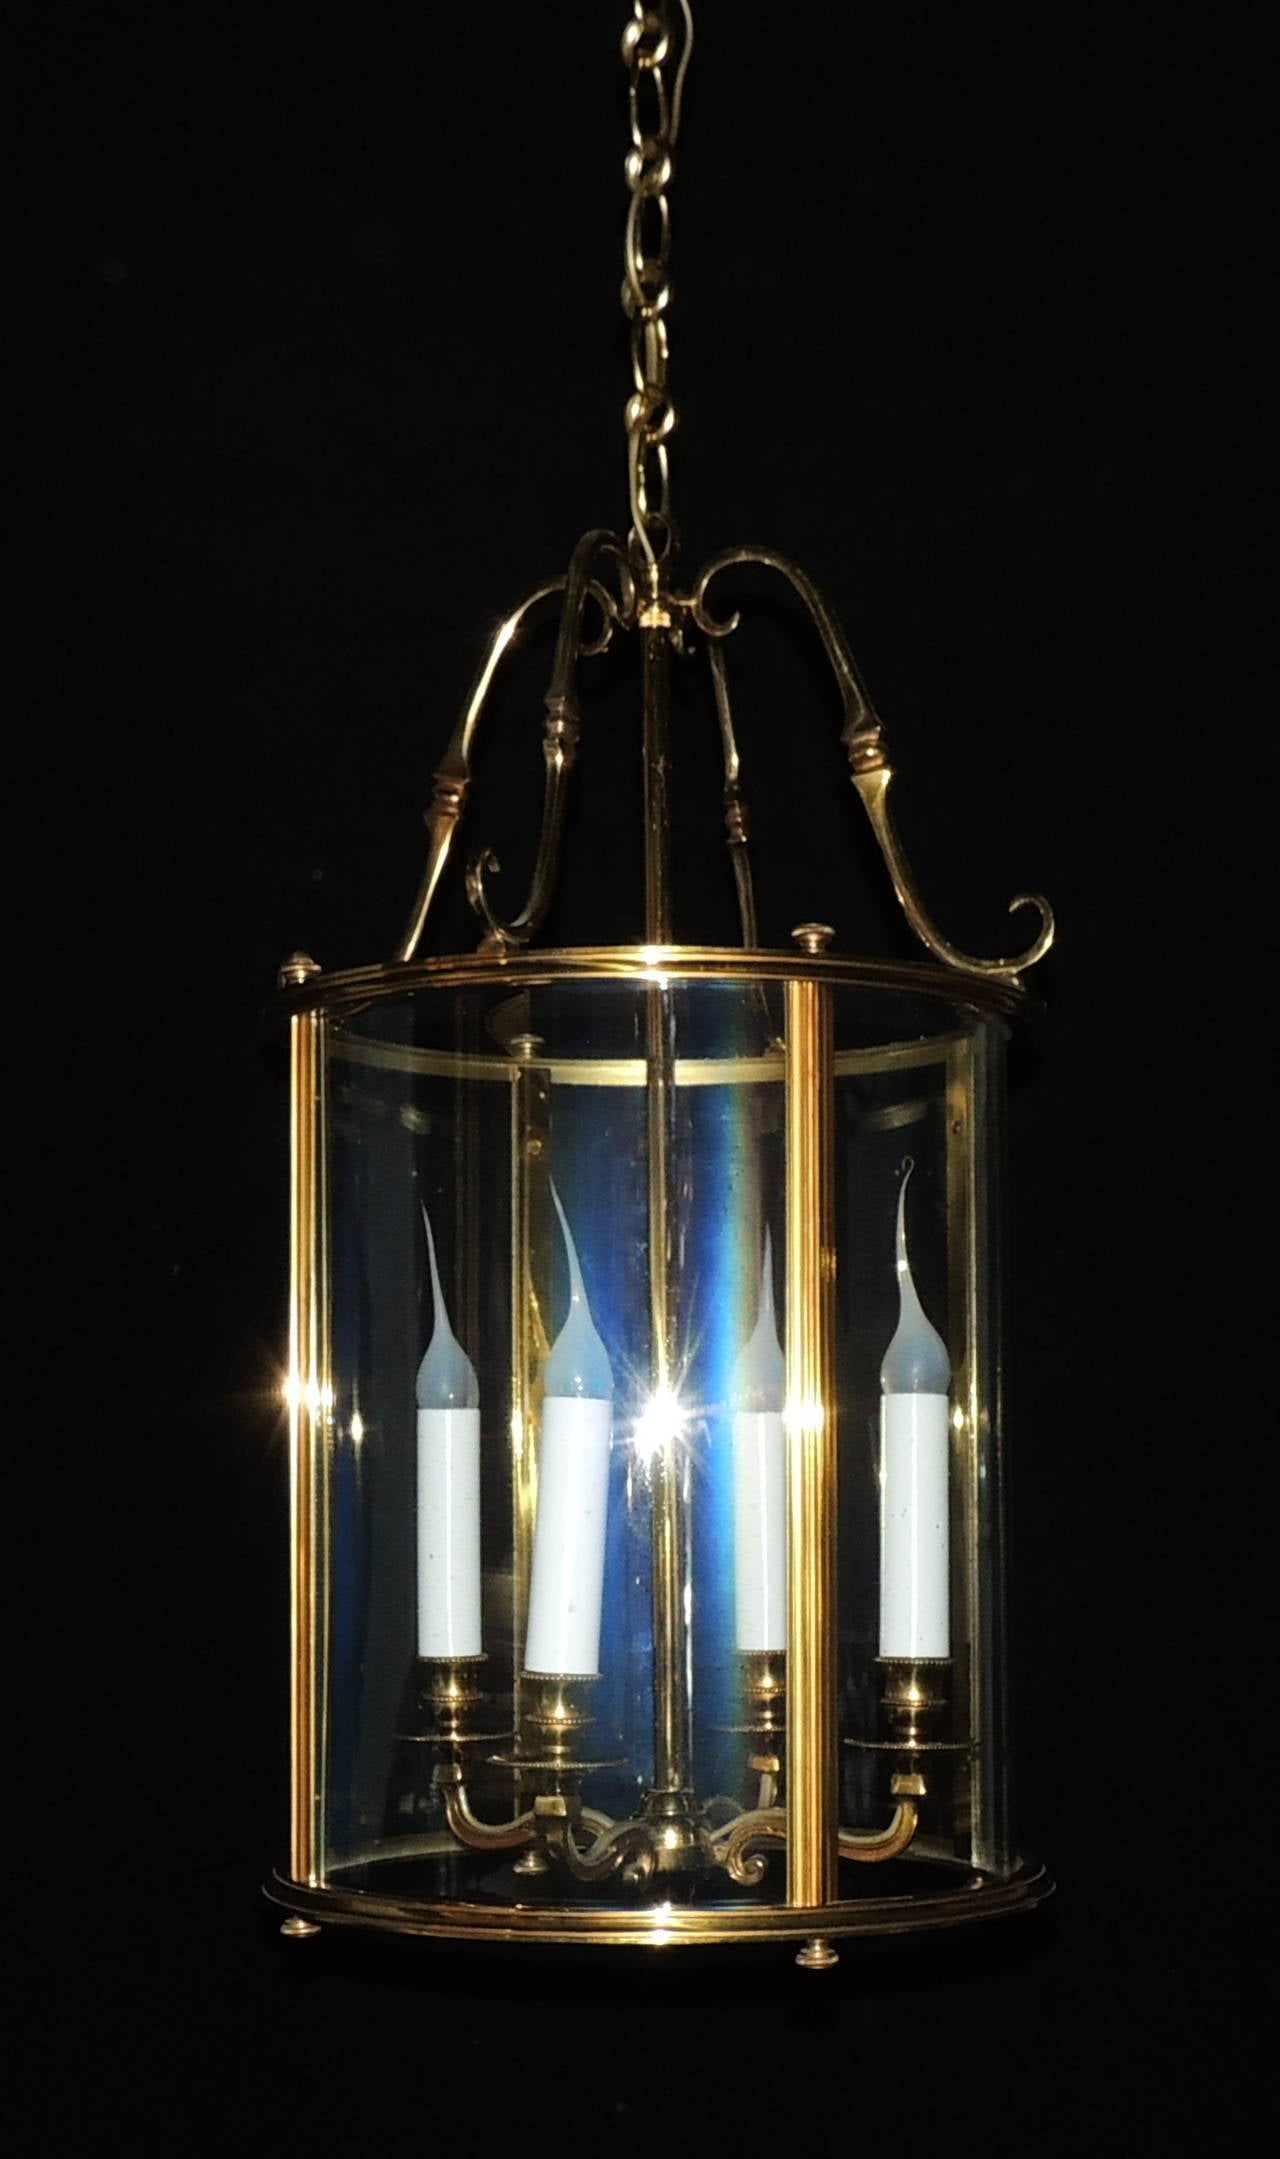 Elegant pair of bronze lanterns with 4 lights and beautiful circular crystal enclosure. Scroll bronze detail at the top, simple lines along the bronze sides and scroll and etched bronze arms holding the 4 candelabra lights. 

Perfect over a